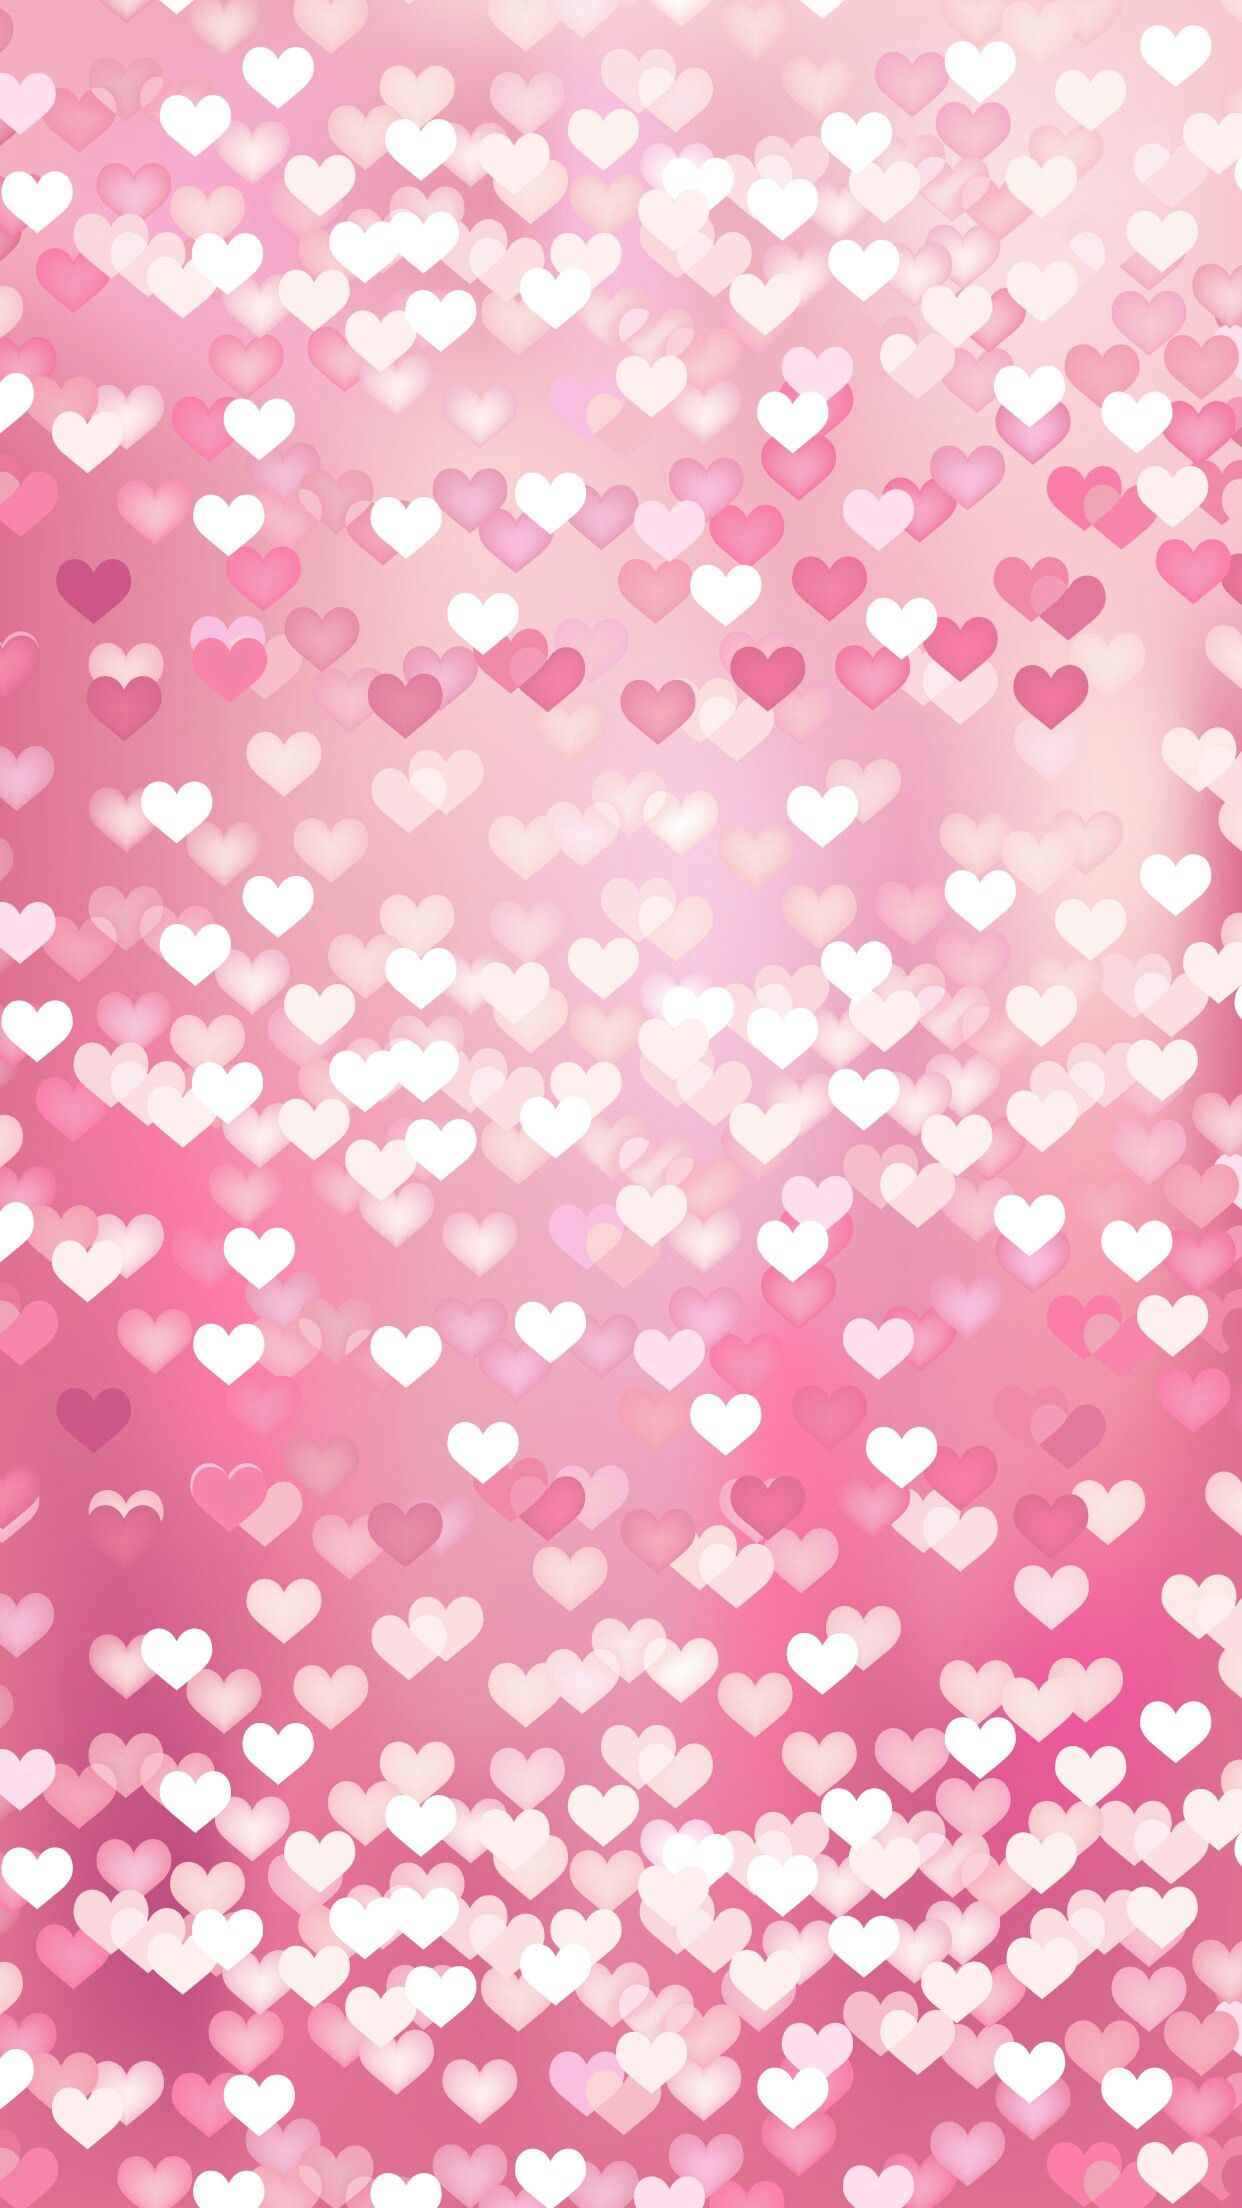 Free download pink hearts wallpaper backgrounds Iphone wallpaper girly